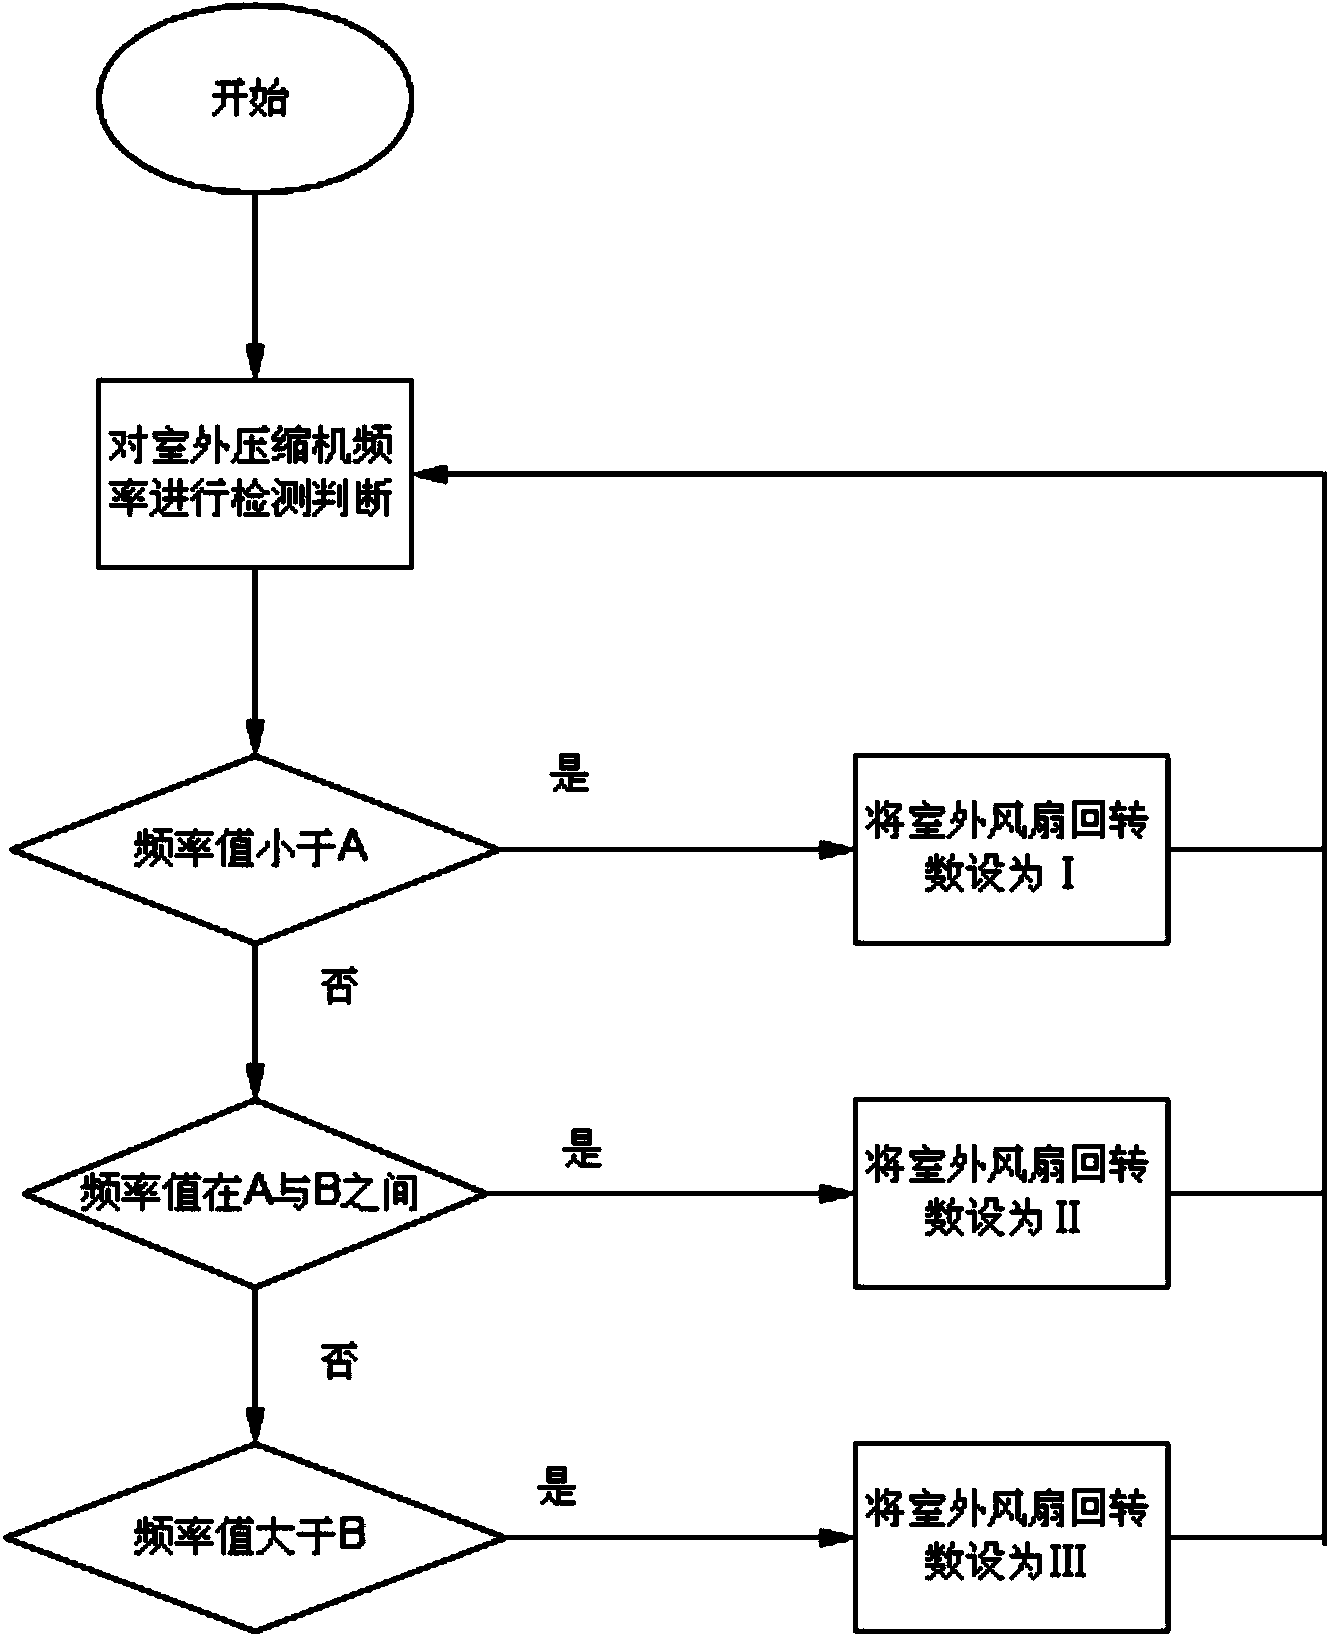 Method for controlling direct-current motor of outdoor unit of air conditioner and air conditioner with method for controlling direct-current motor of outdoor unit of air conditioner